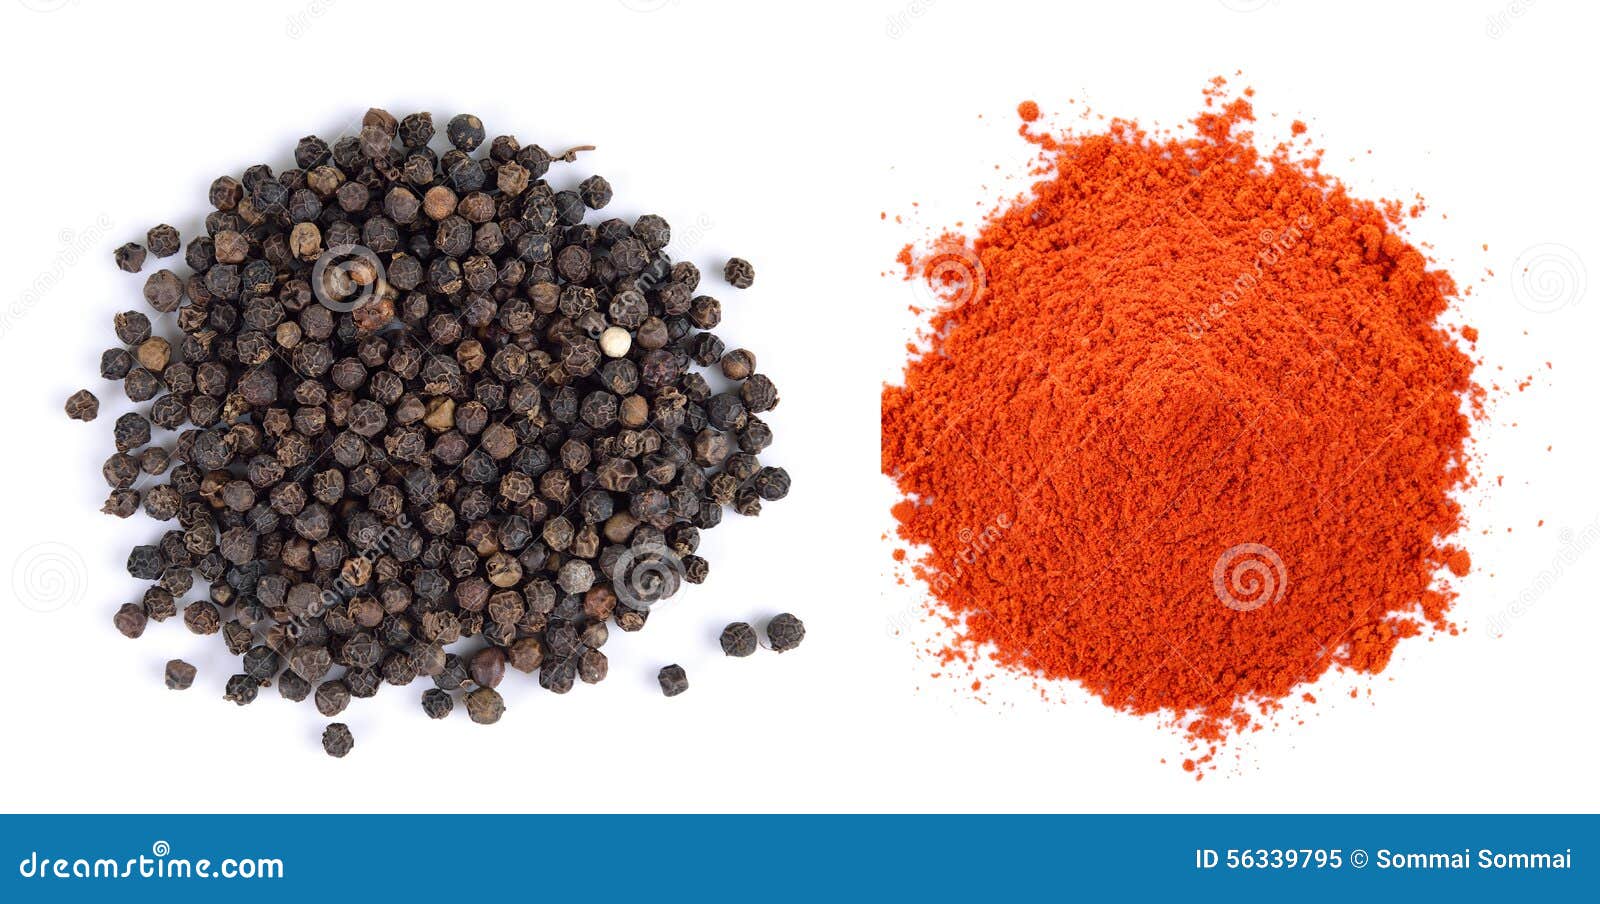 pile of red paprika powder and black pepper seeds on white background